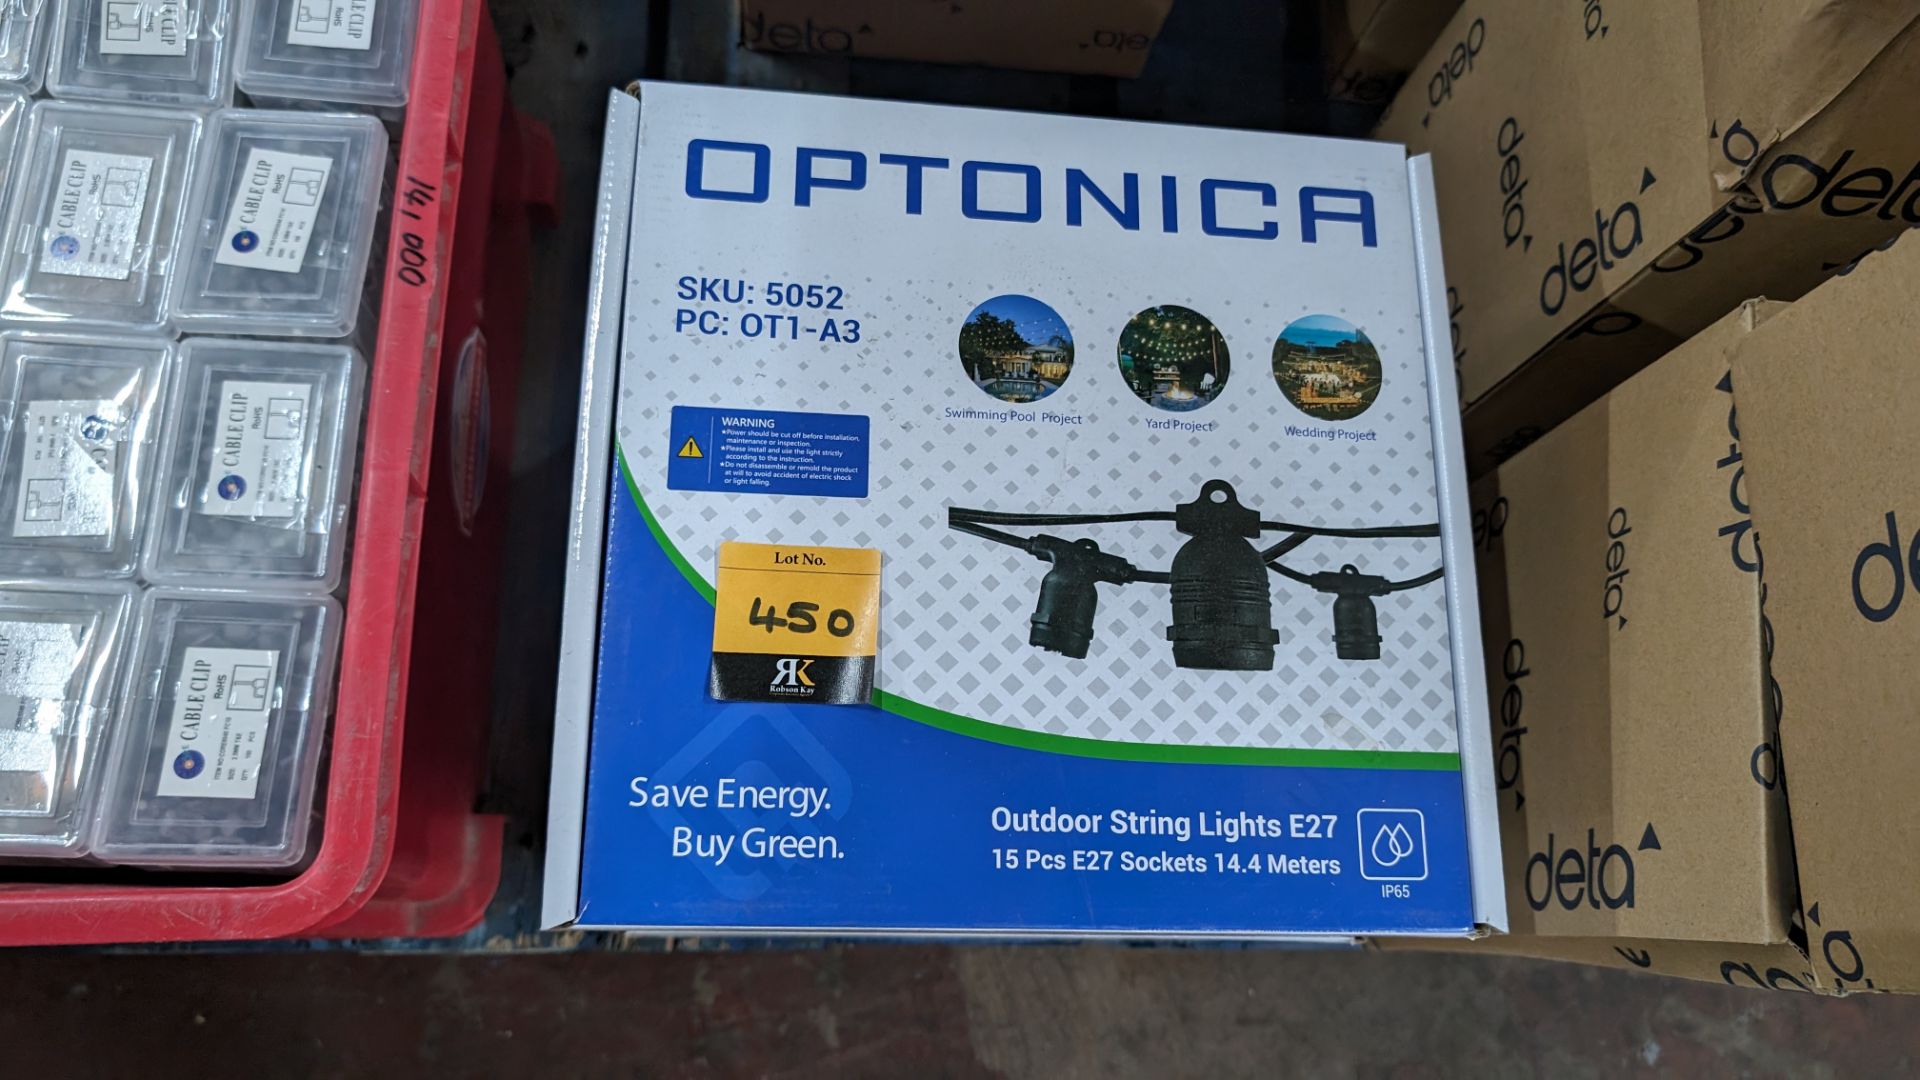 3 off Optonica outdoor string lights E27 - Image 2 of 3